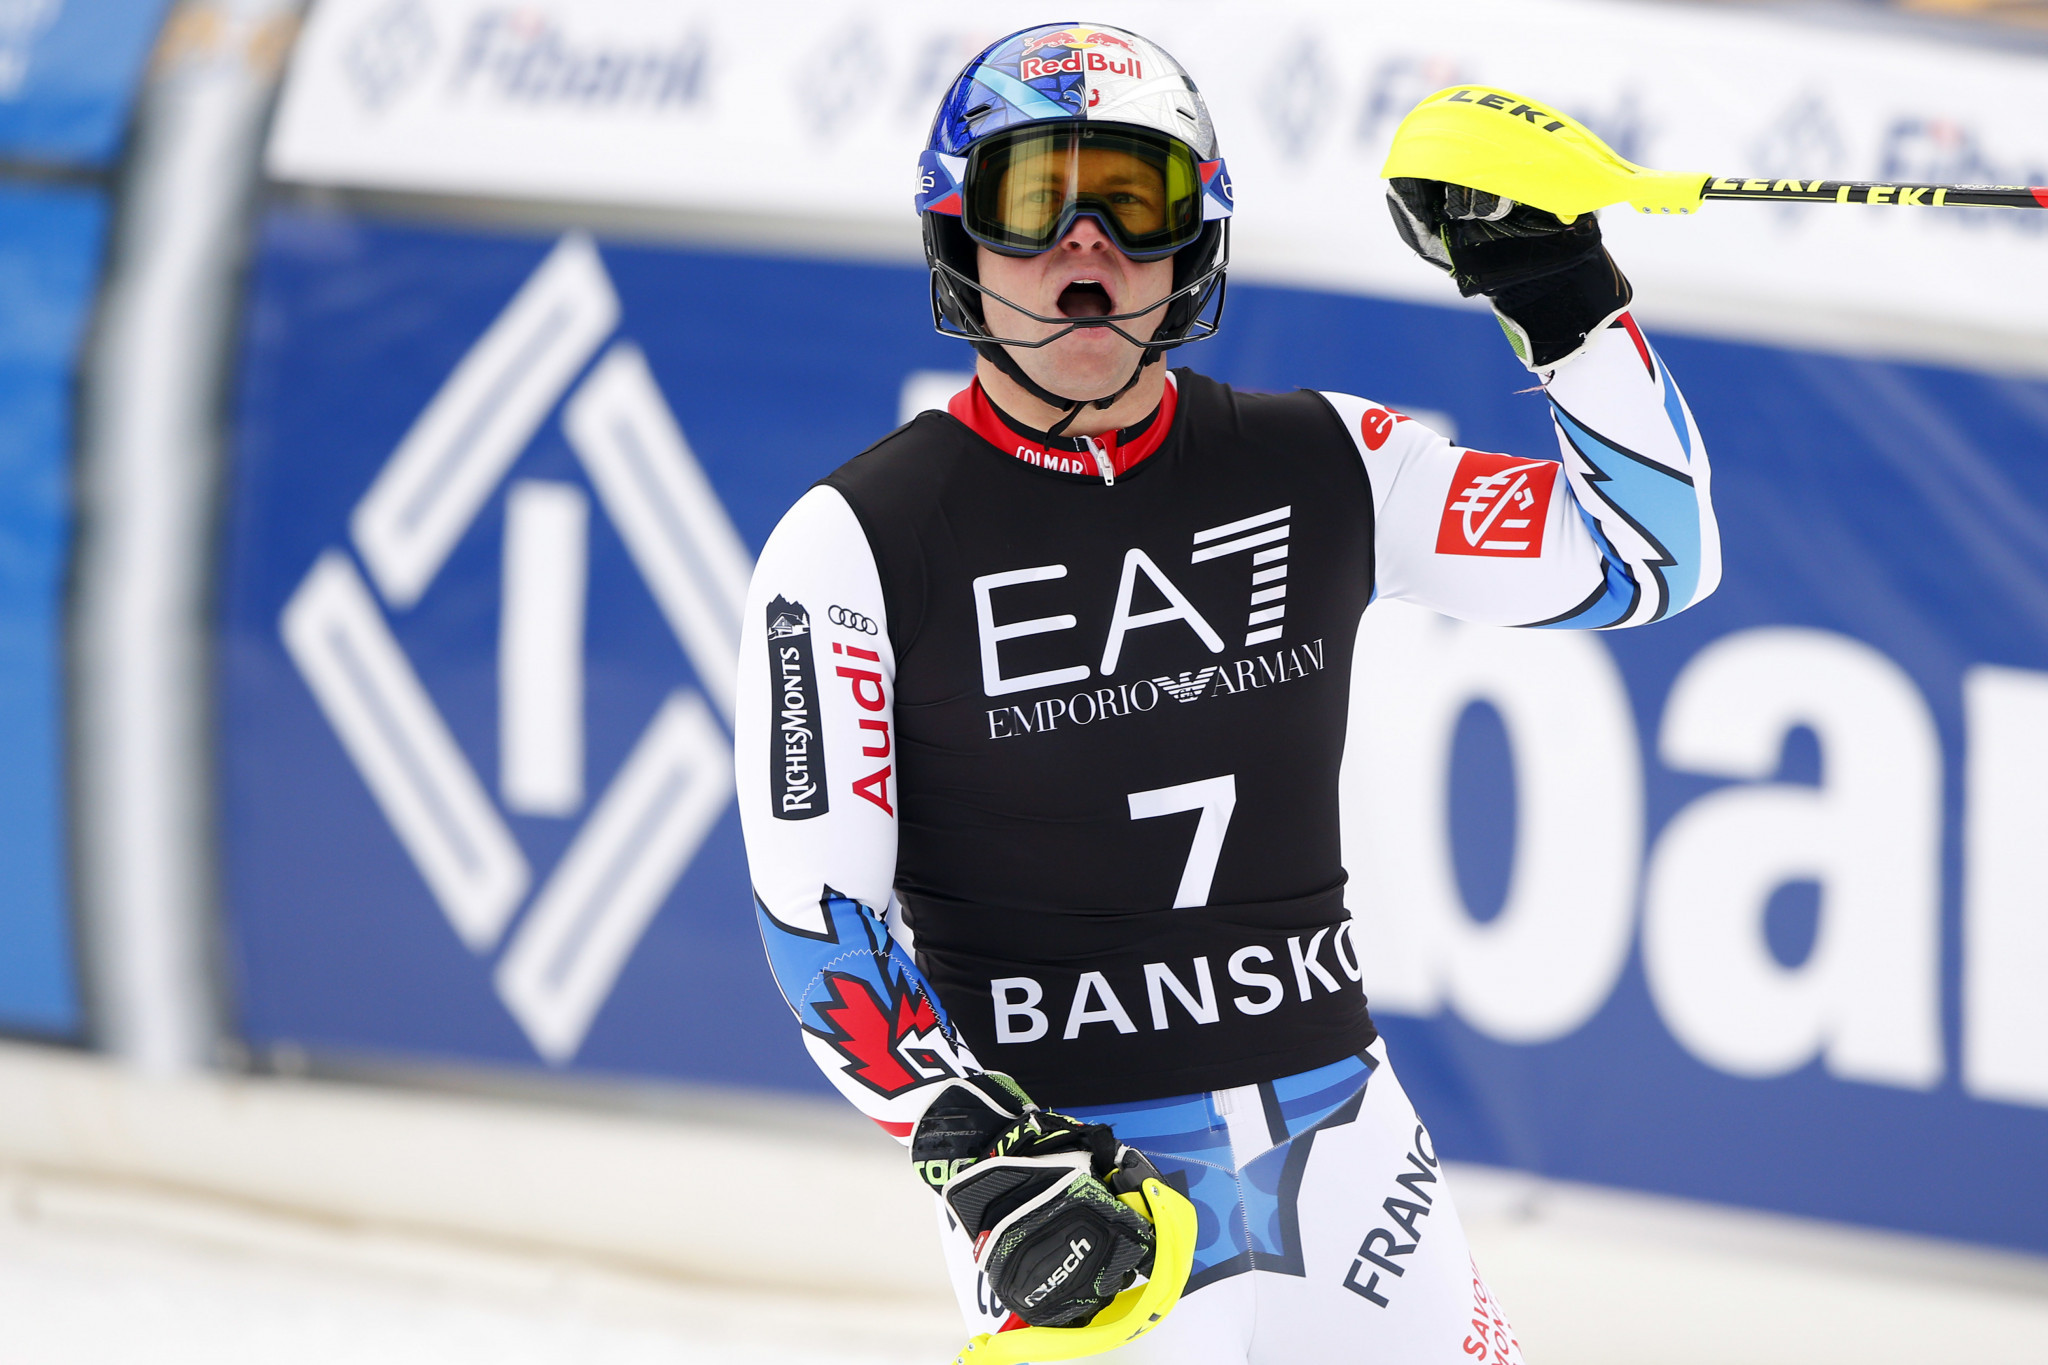 Pinturault claims fifth Alpine combined discipline title after win at FIS Alpine Skiing World Cup in Bansko